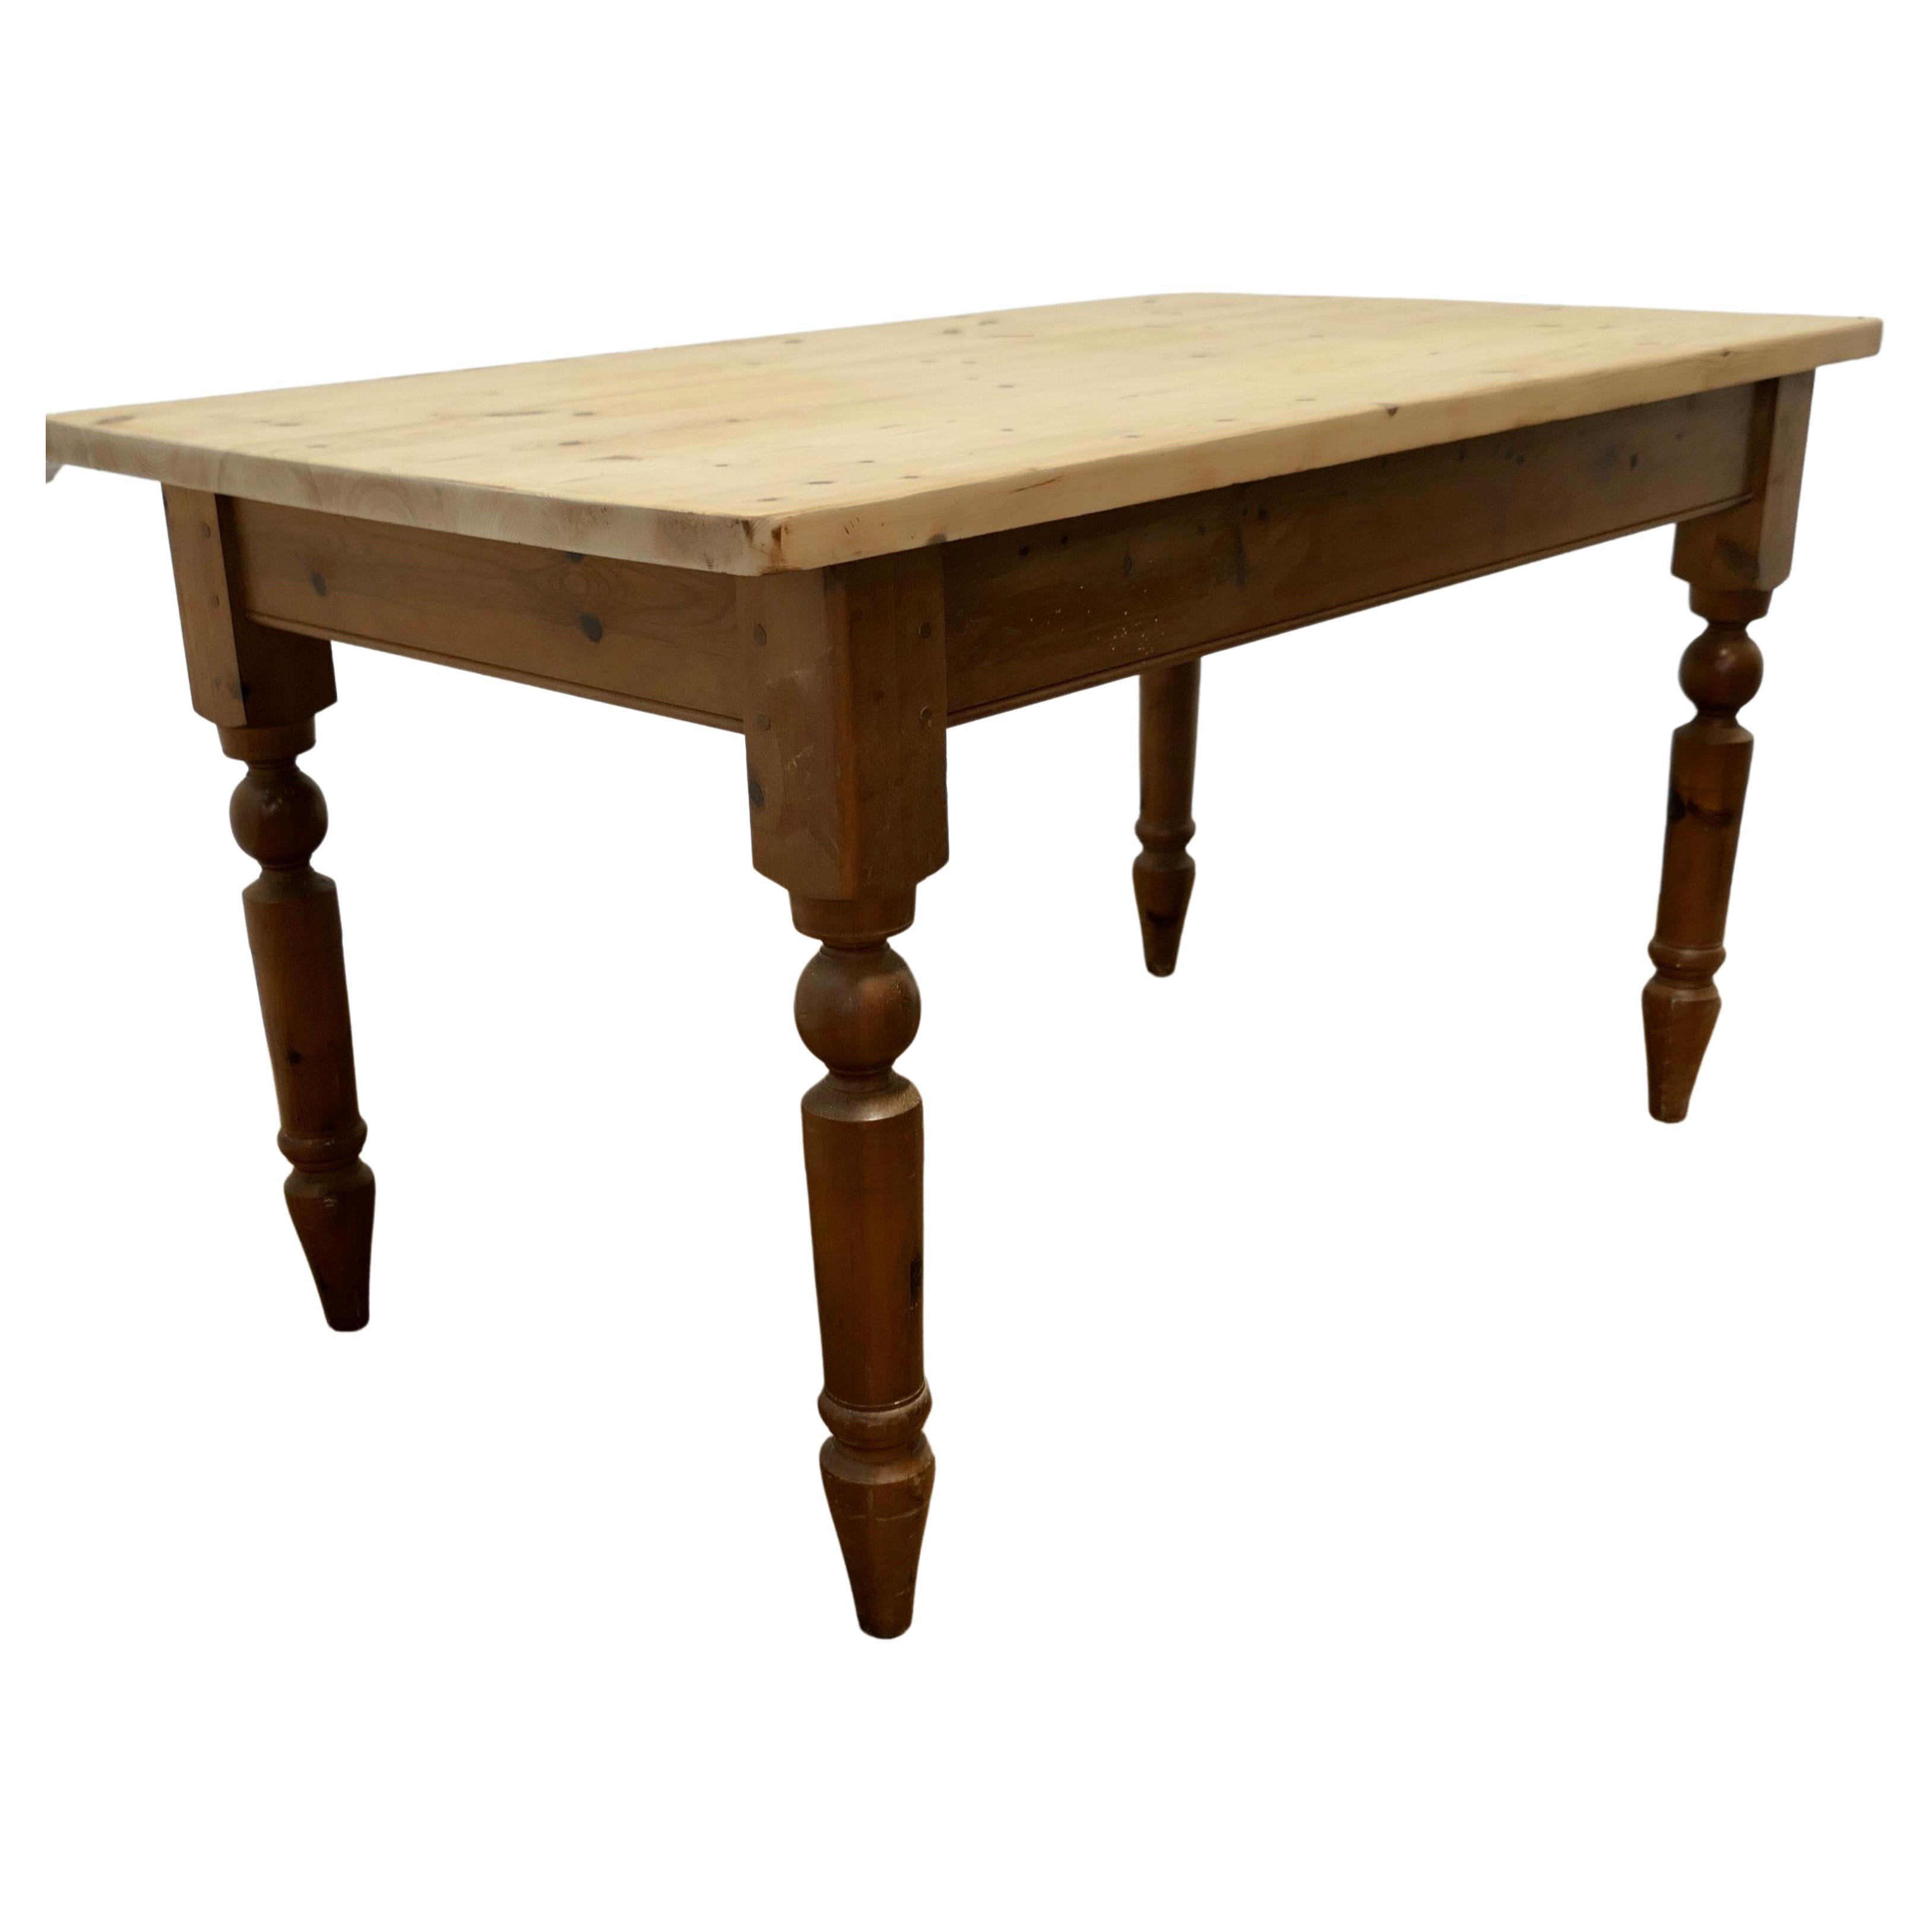 Pine Scrub Top Farmhouse Kitchen Table This Good Traditional Table For Sale